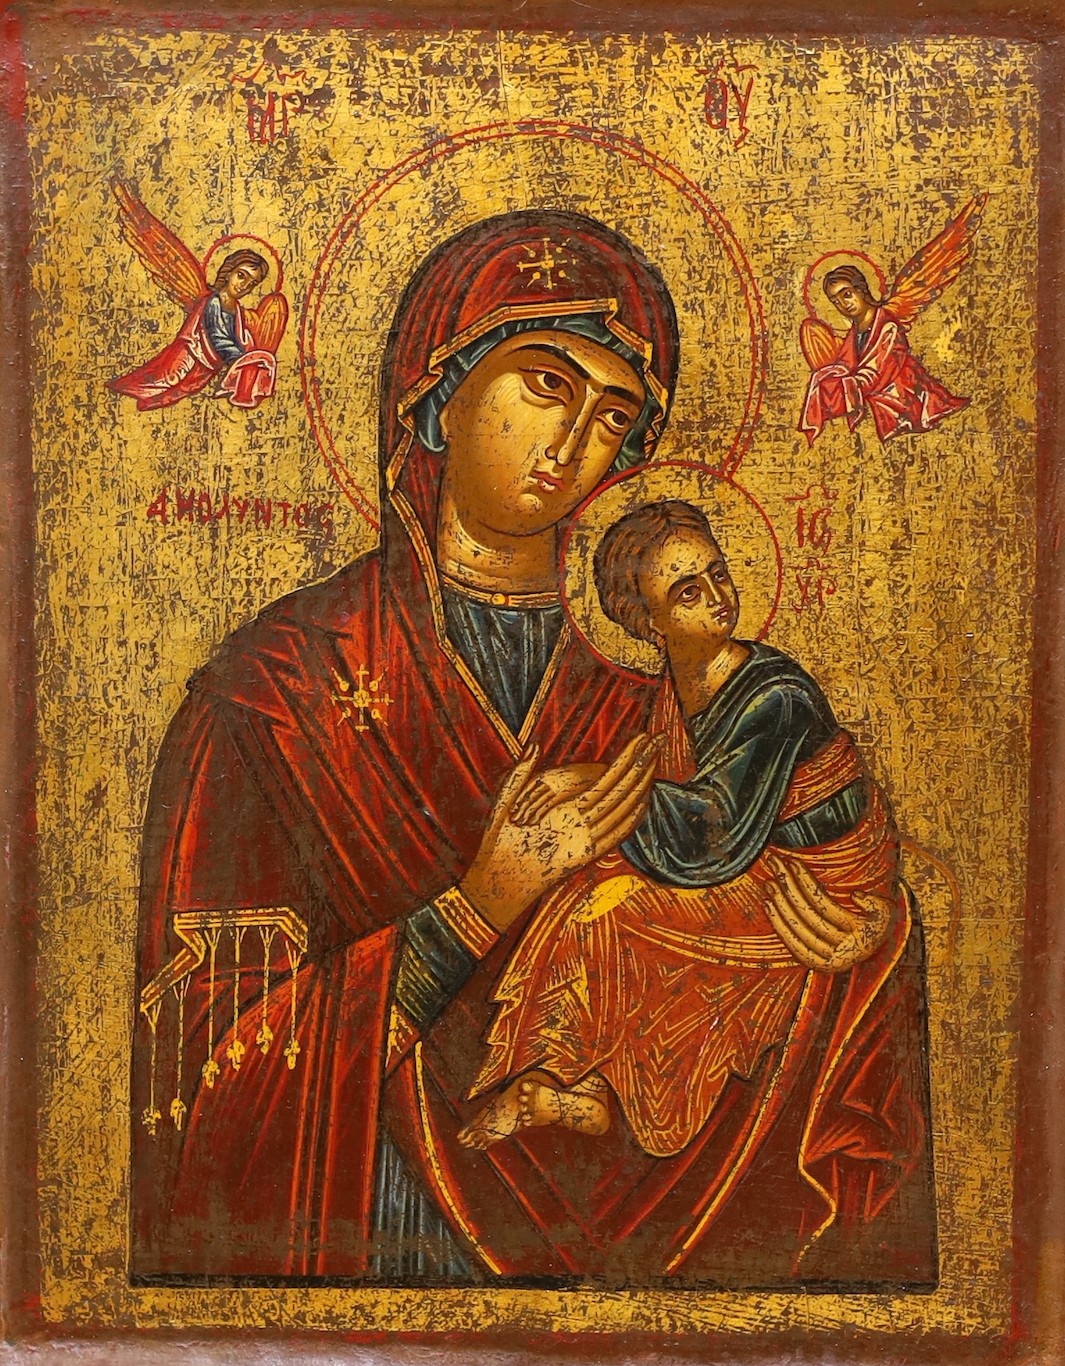 Eastern European School, tempera on panel, Icon of the Virgin and child, 36 x 28cm